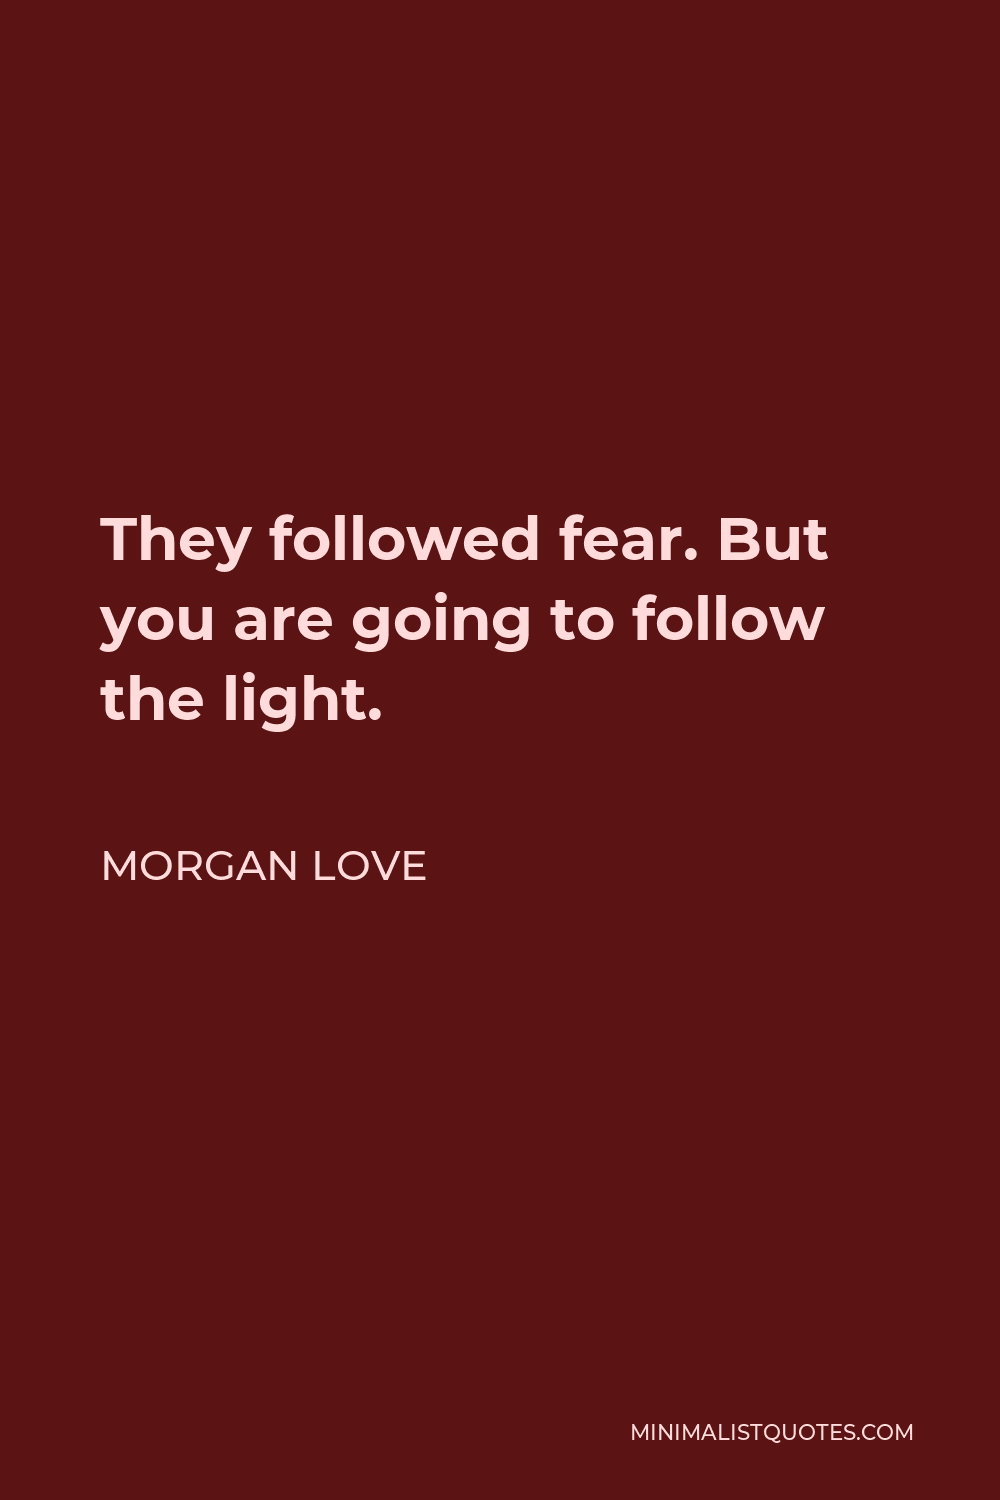 Morgan Love Quote - They followed fear. But you are going to follow the light.